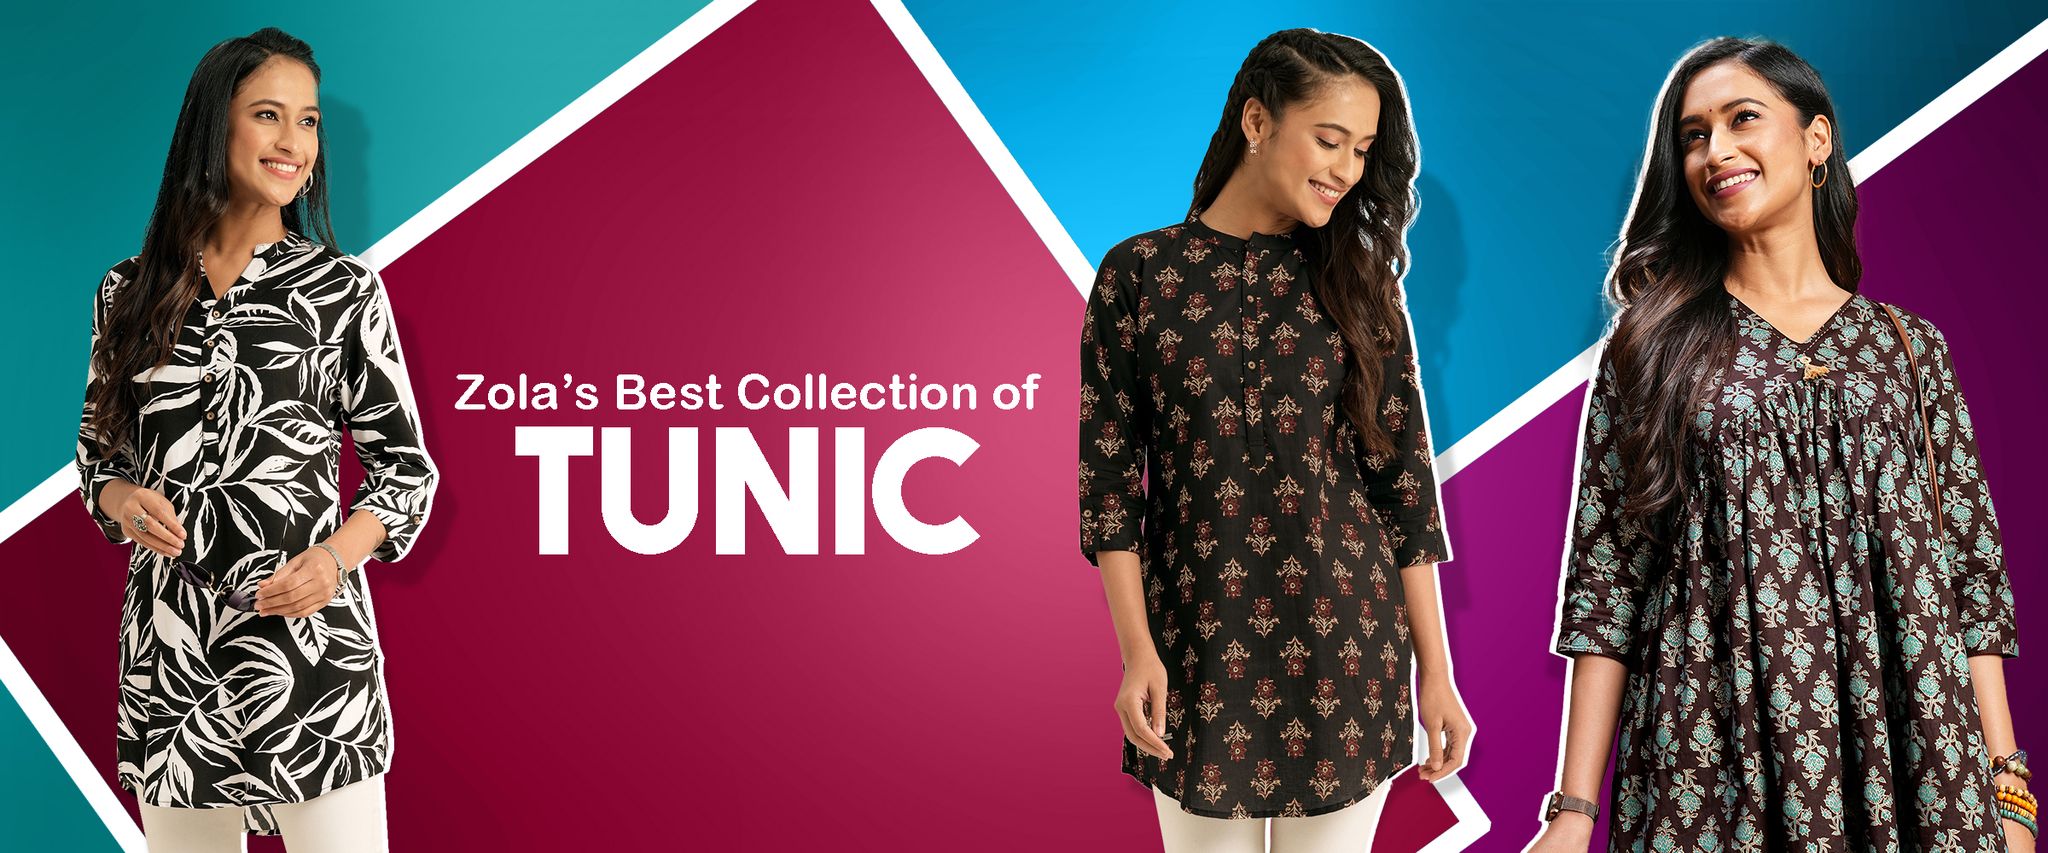 Flowing Elegance: The Allure of Women's Tunic Tops Unveiled